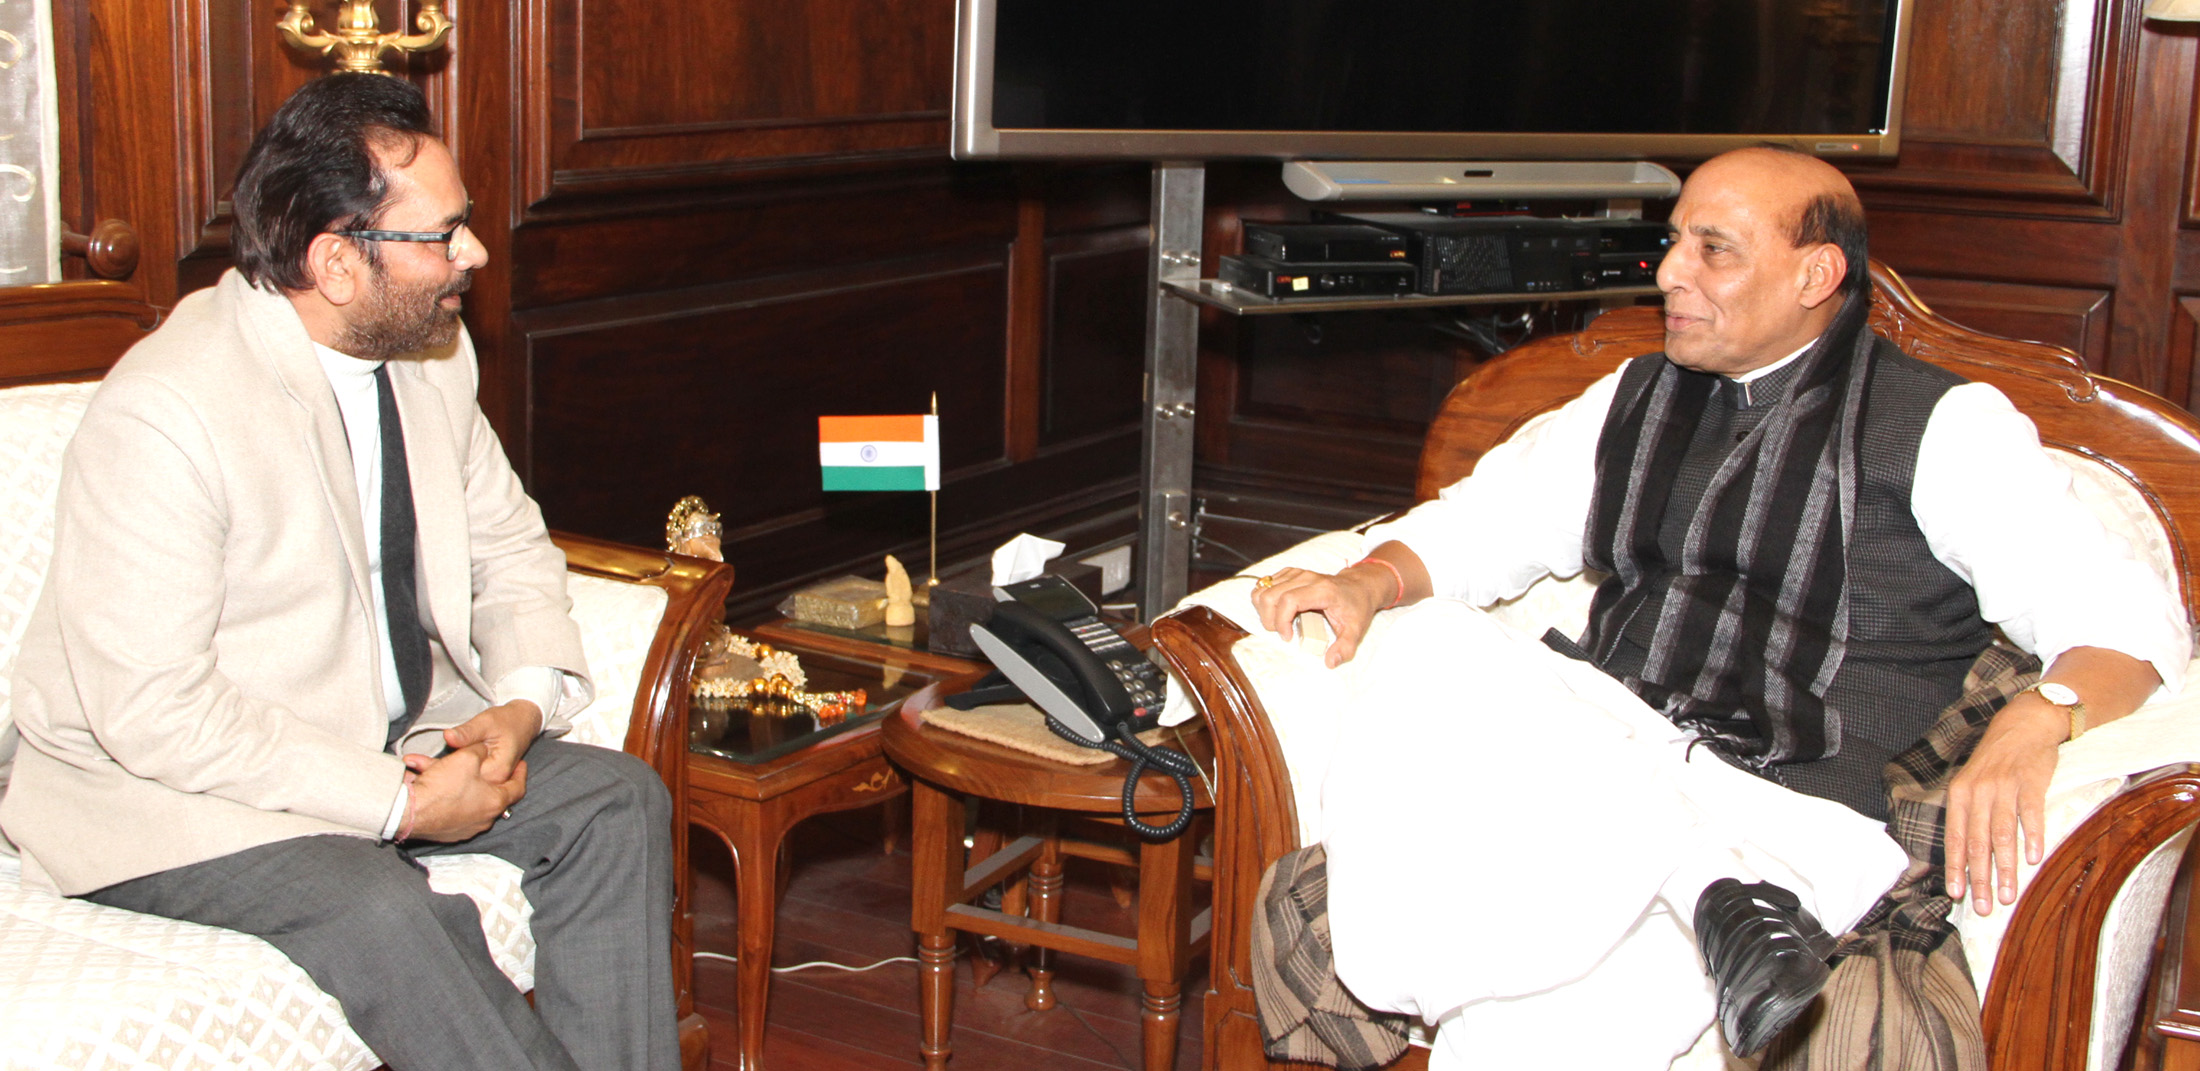 The Minister of State for Minority Affairs and Parliamentary Affairs, Shri Mukhtar Abbas Naqvi meeting the Union Home Minister, Shri Rajnath Singh, in New Delhi on January 15, 2016.